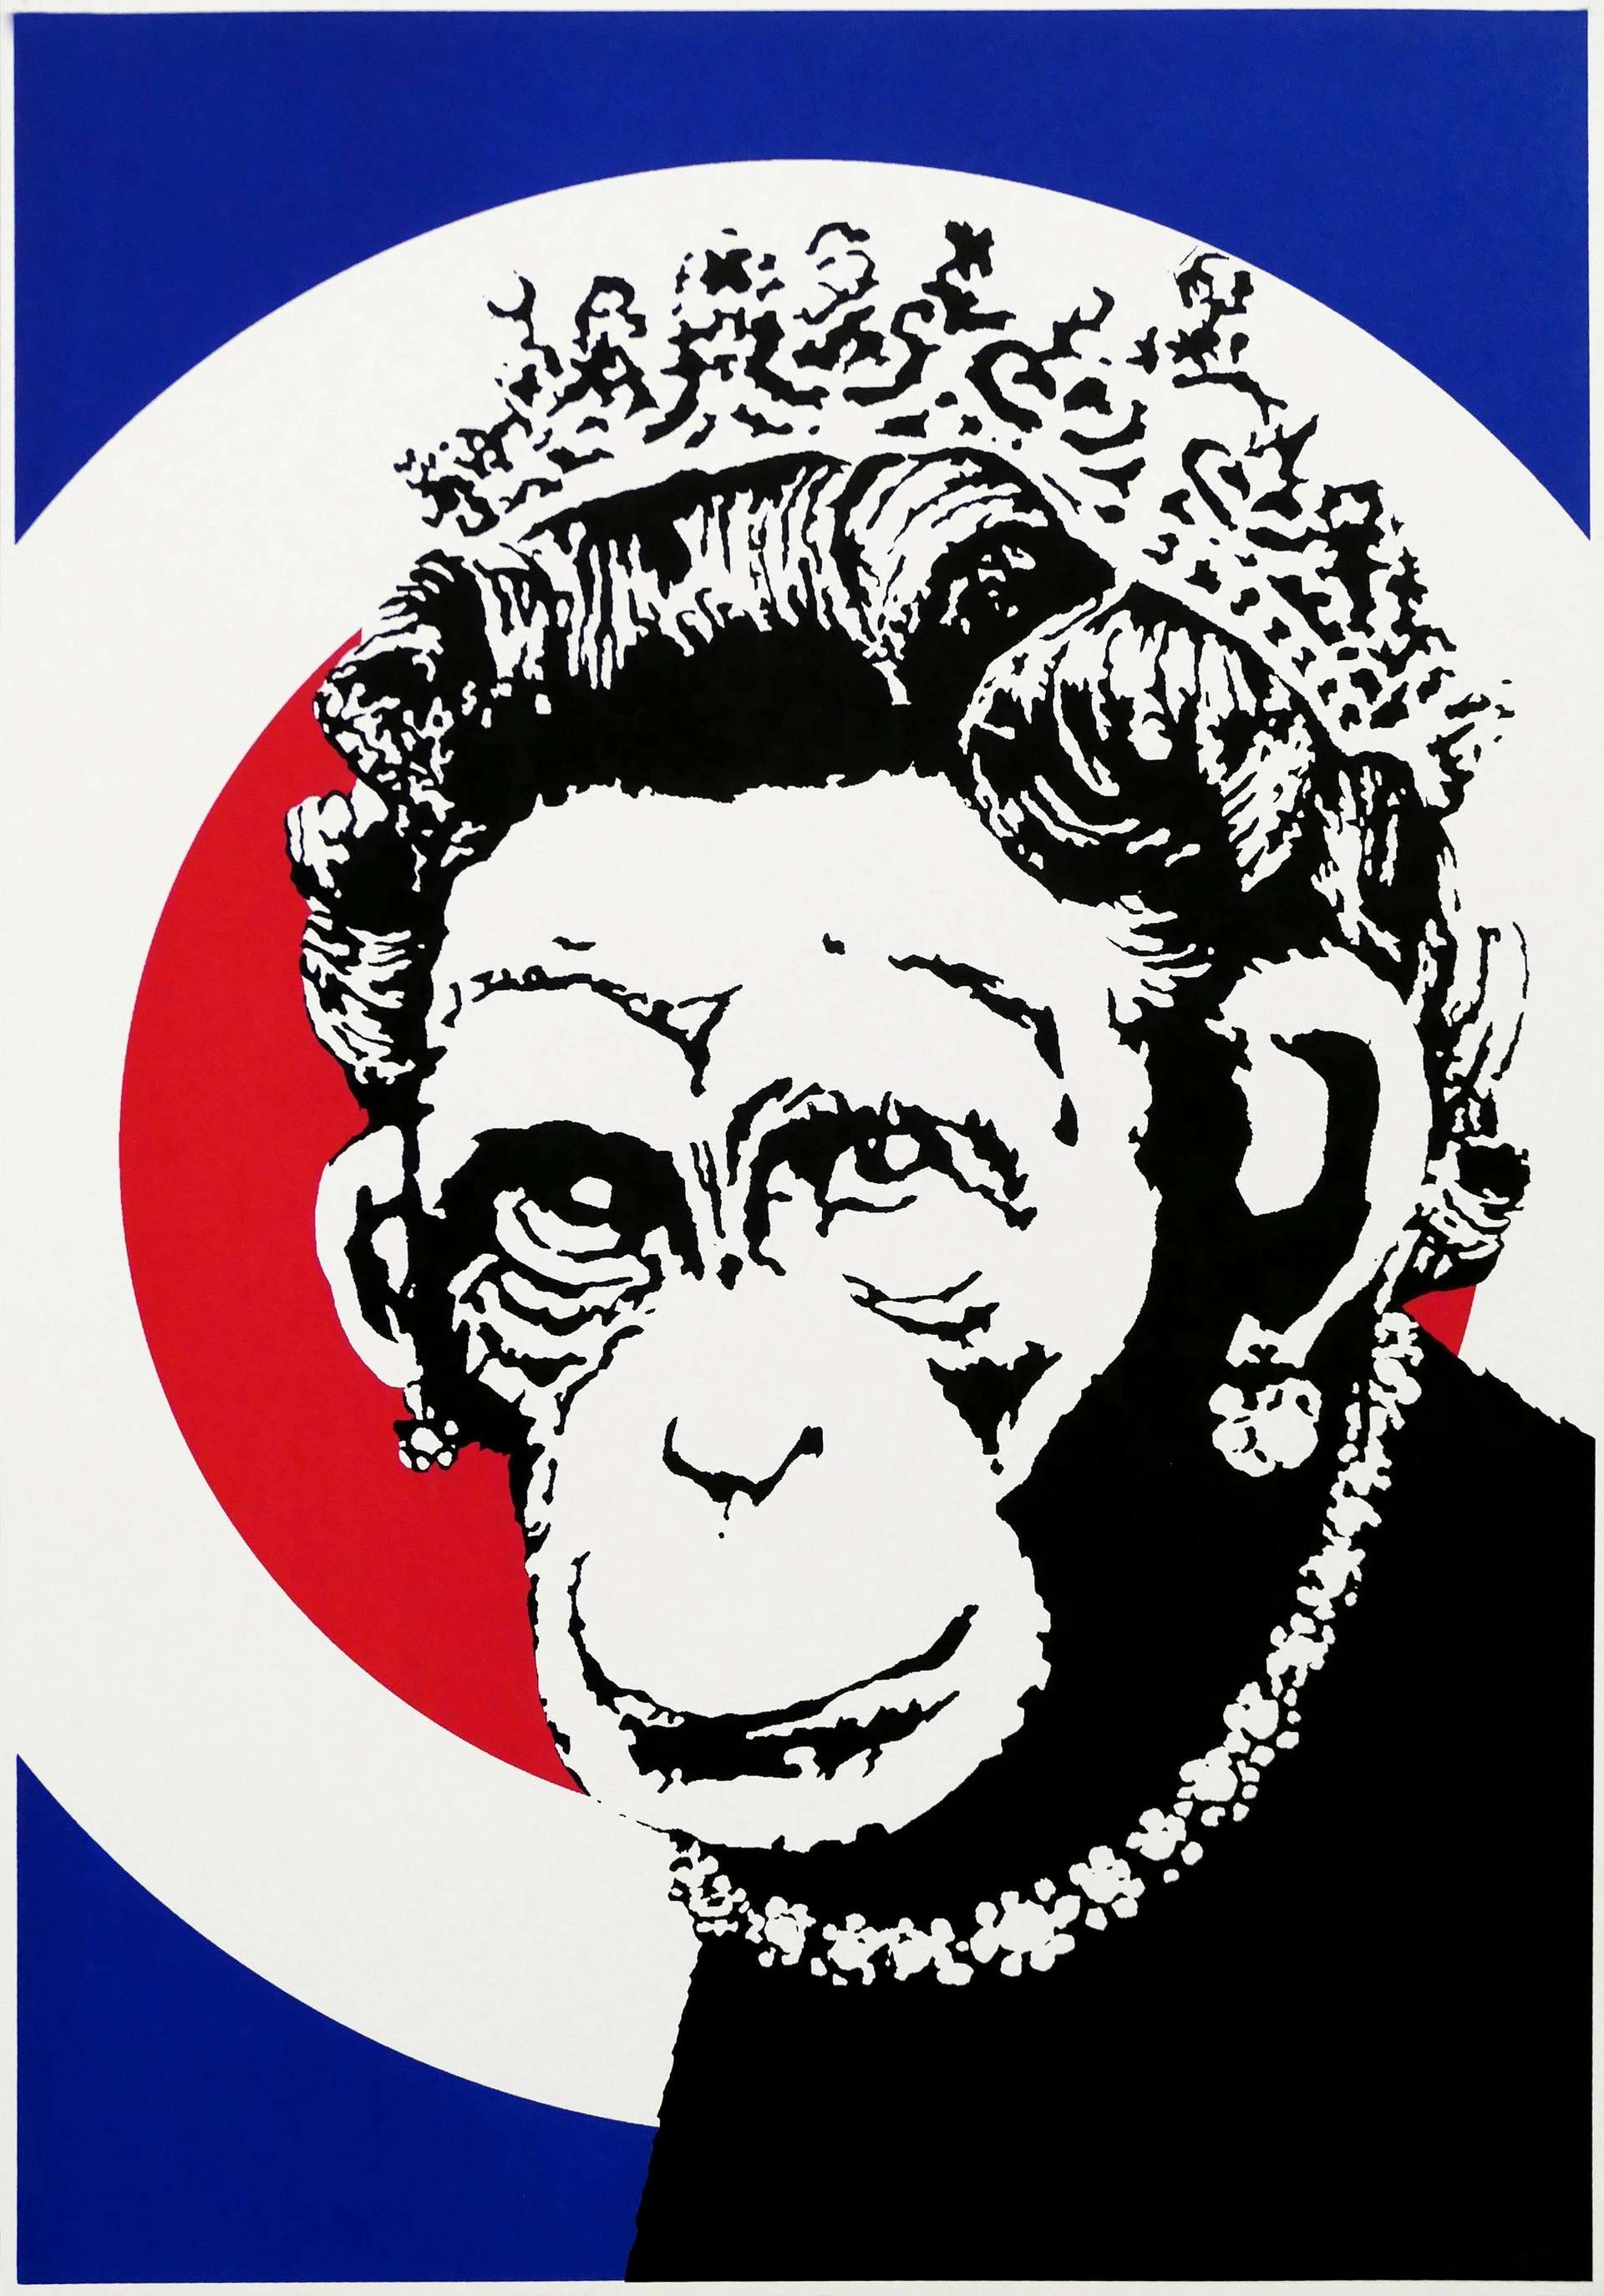 Screen print of a monkey dressed as the Queen of England